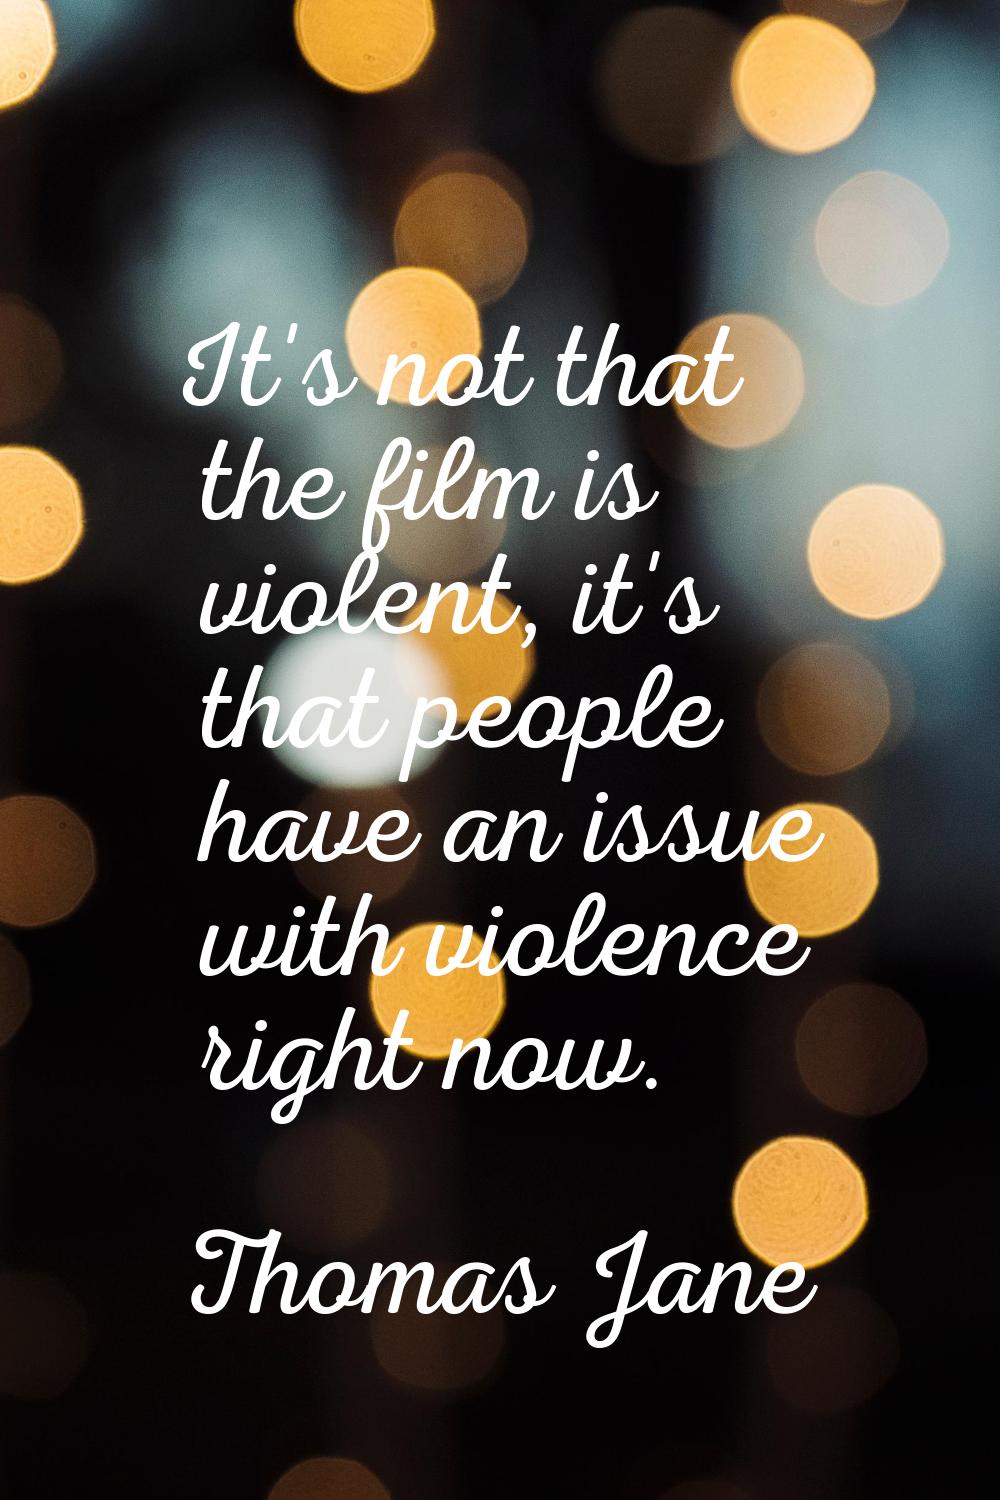 It's not that the film is violent, it's that people have an issue with violence right now.